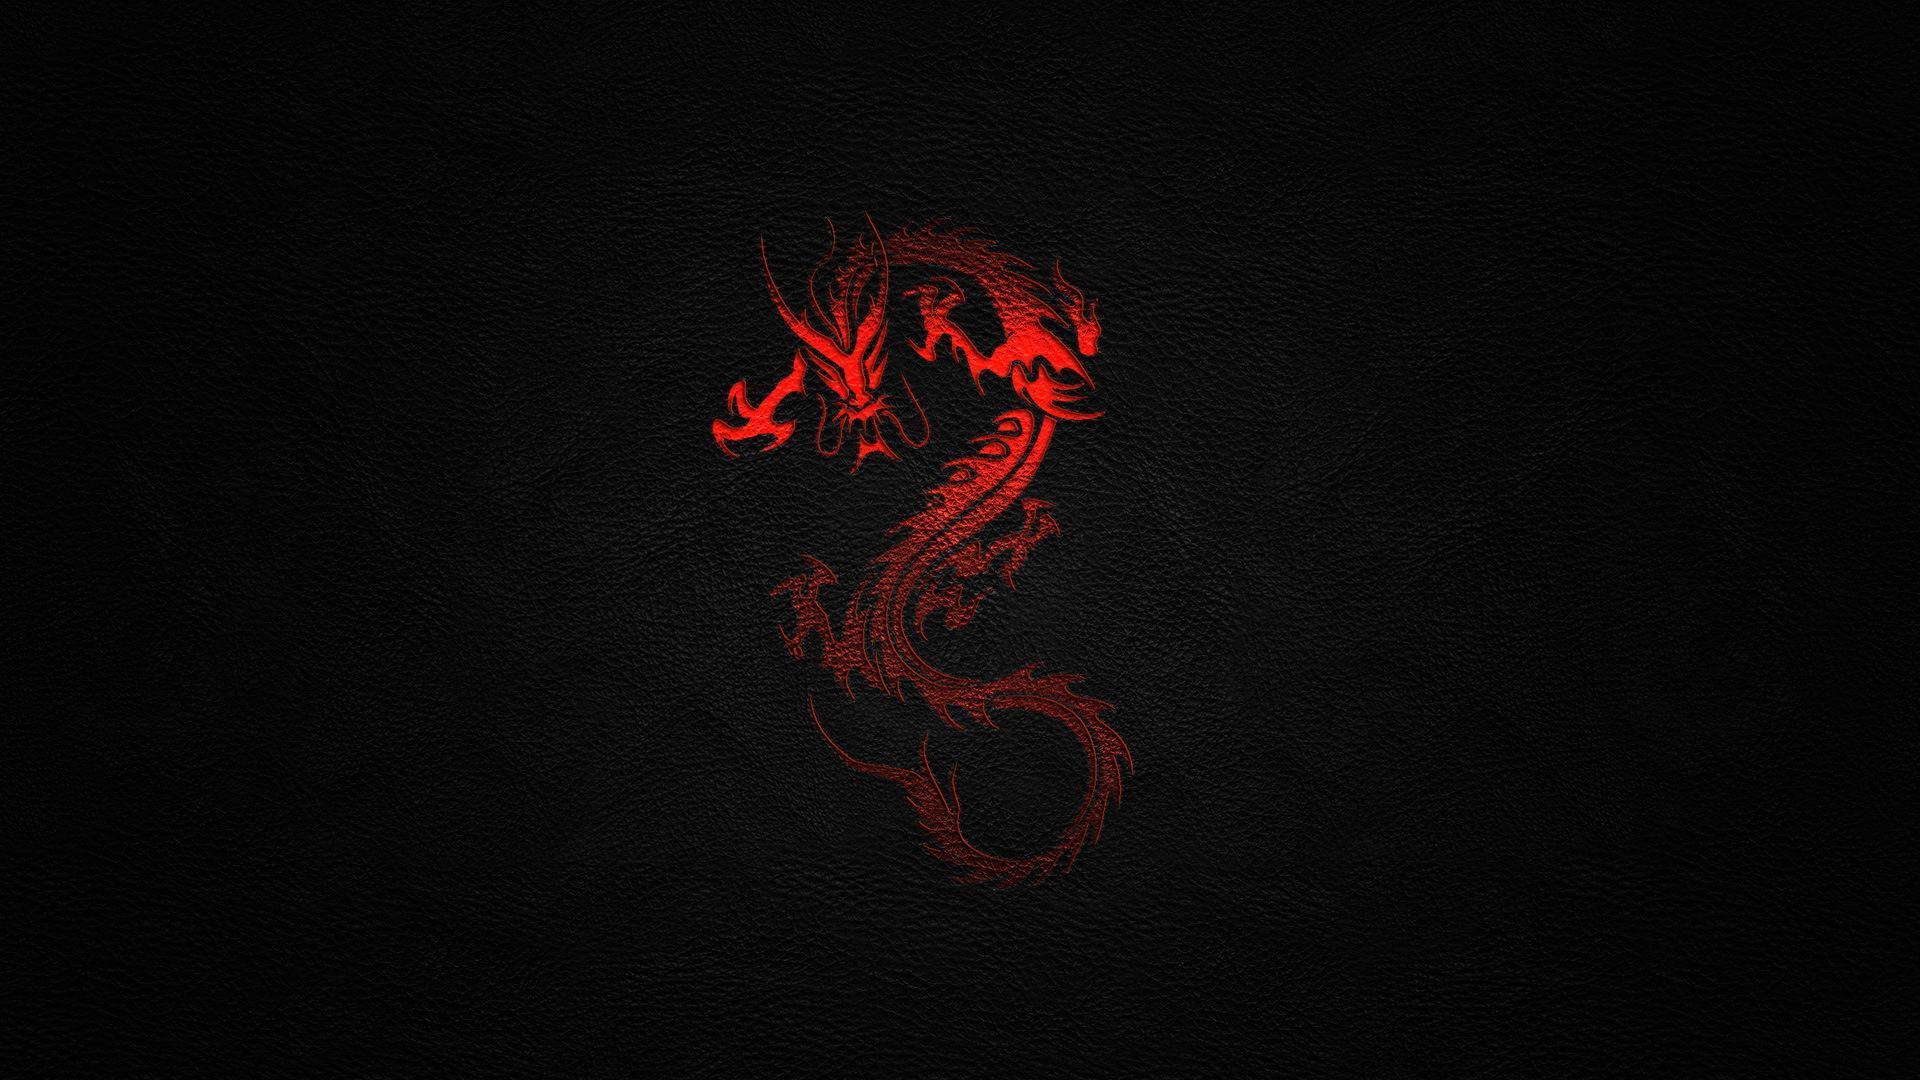 Wallpaper For > Black And Red Dragon Wallpaper